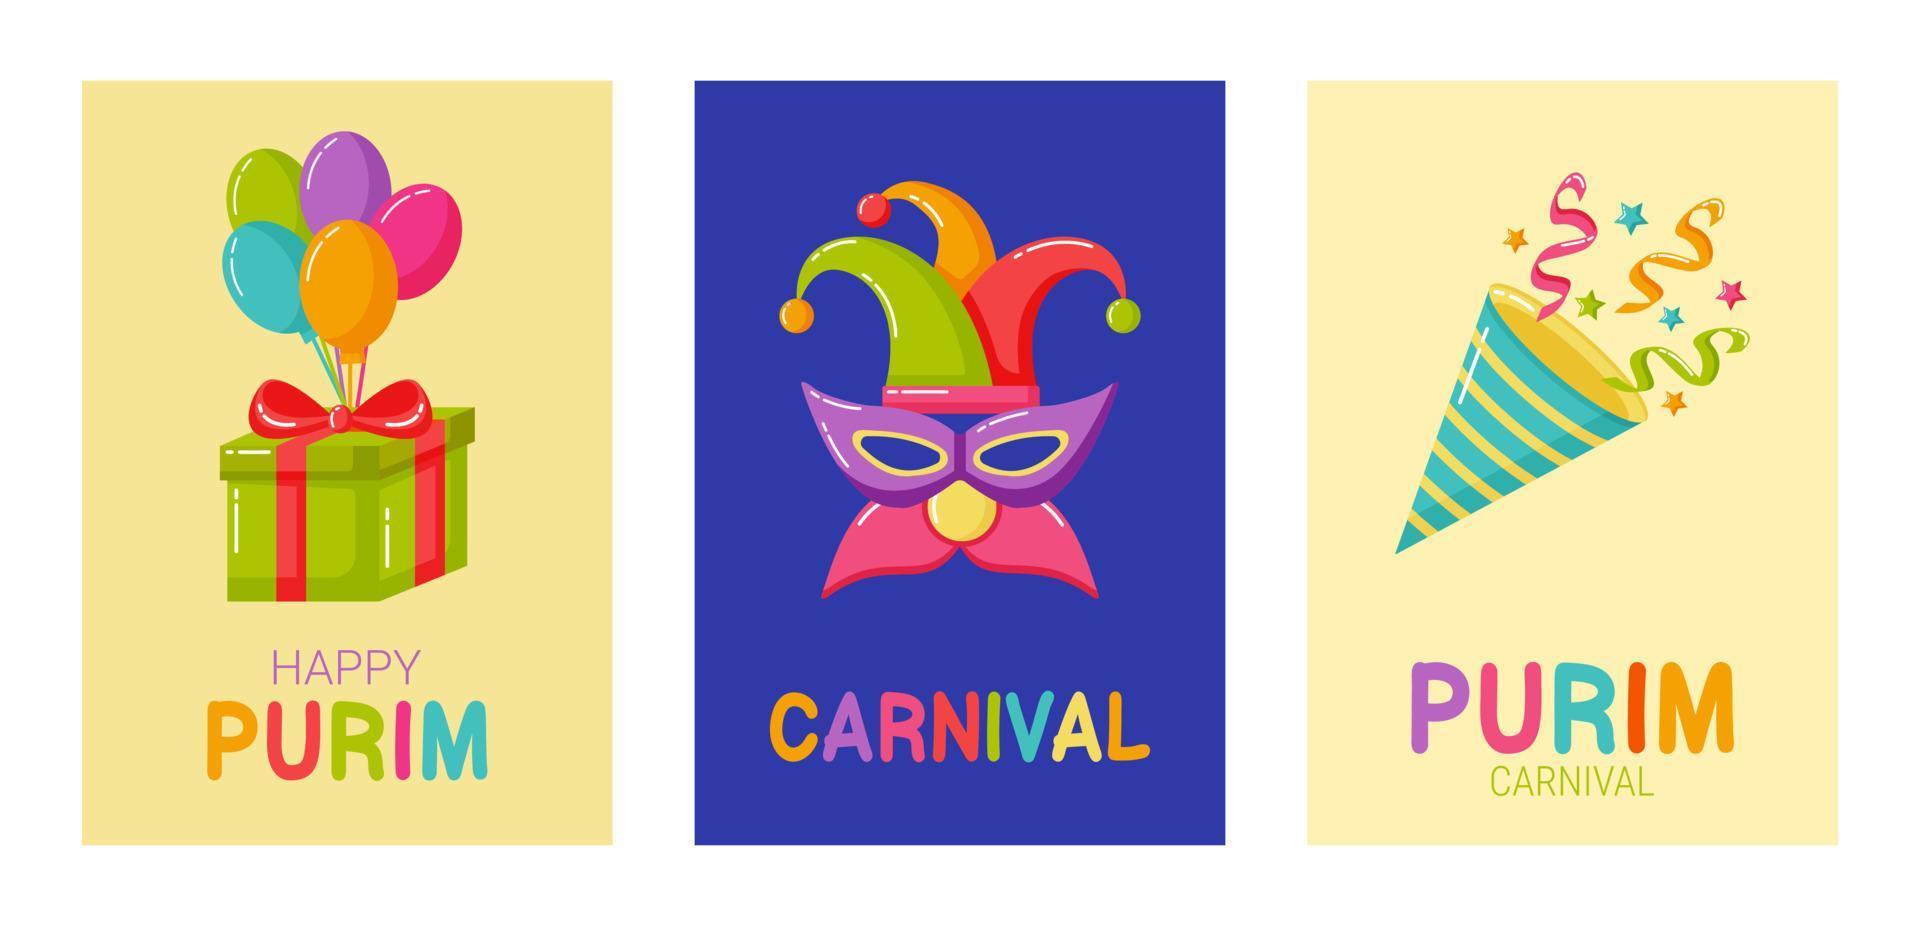 Bright colorful poster for Purim festival vector